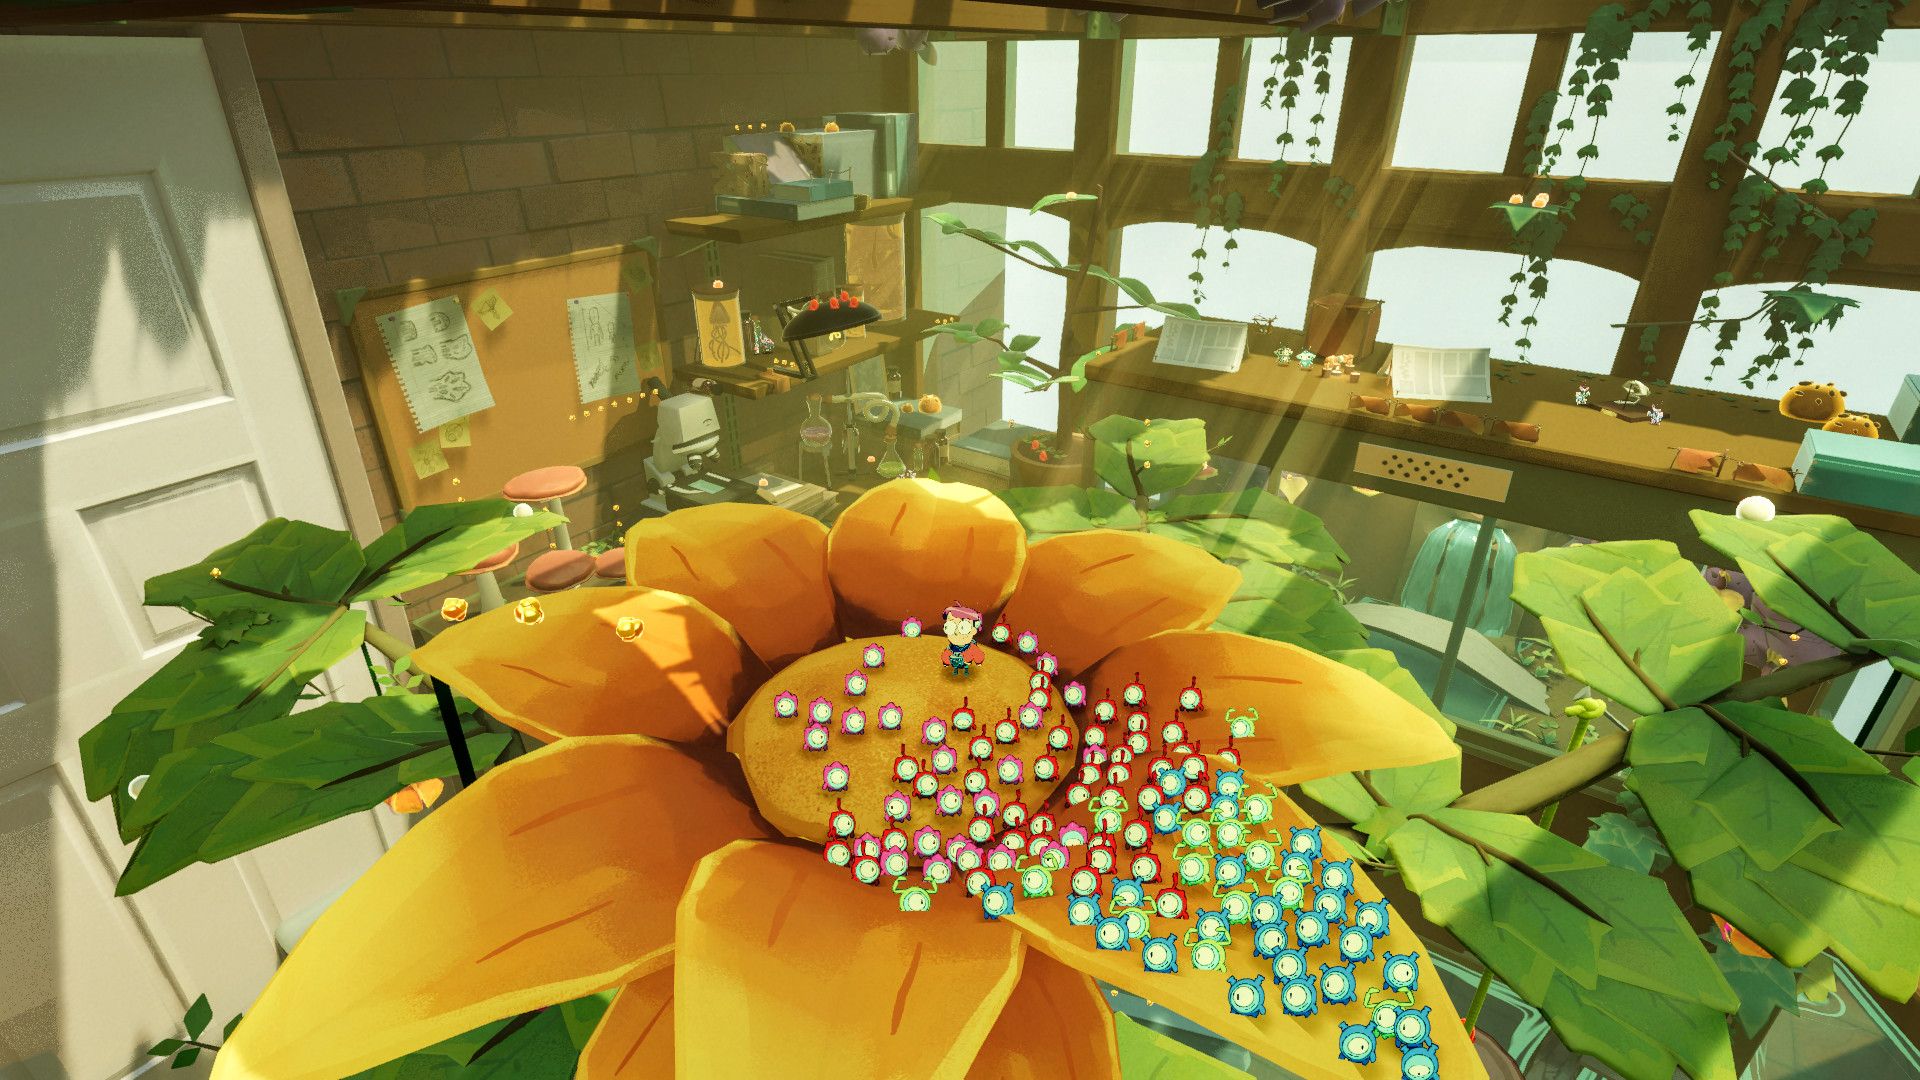 Video game screenshot showing hundreds of little characters gathered on a flower